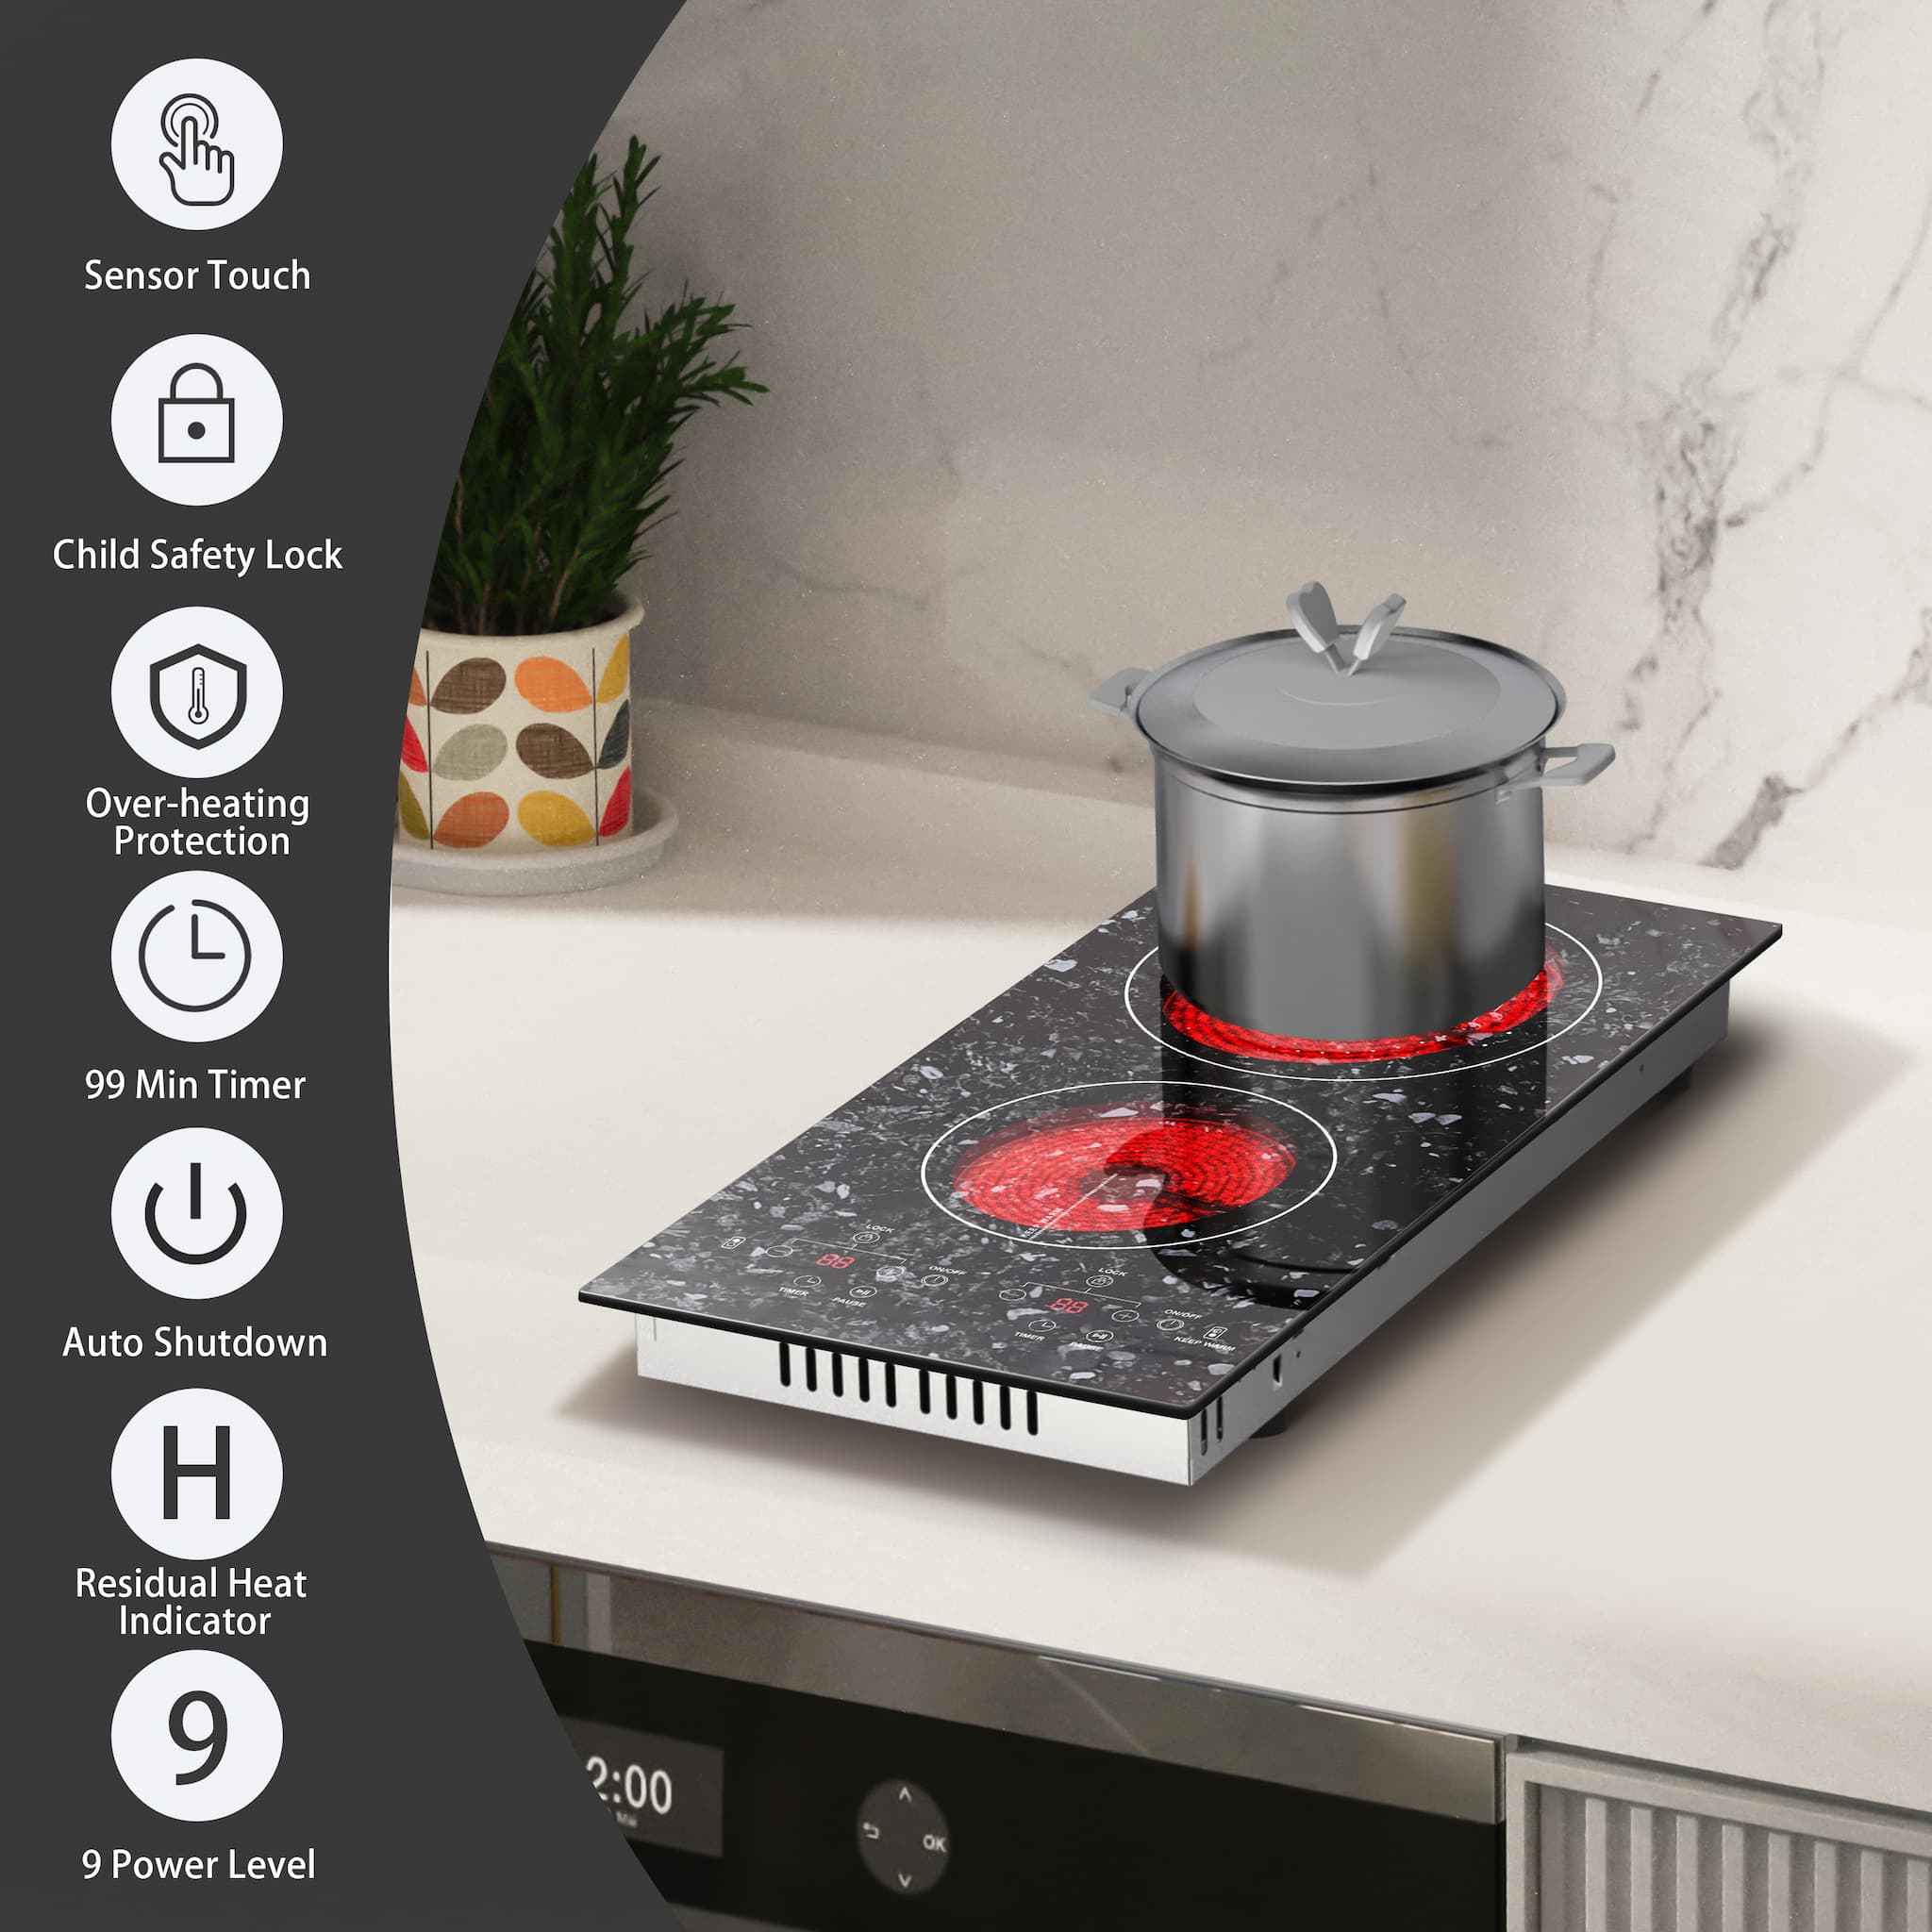 The power of the electric cooktop 2 burner is 1400W and 600W. Large burners have 1-9 adjustable heat levels, while small burner has two: "L" means low and "HI" means high. Small burner is generally suitable for heating coffee and milk, or keeping warm.